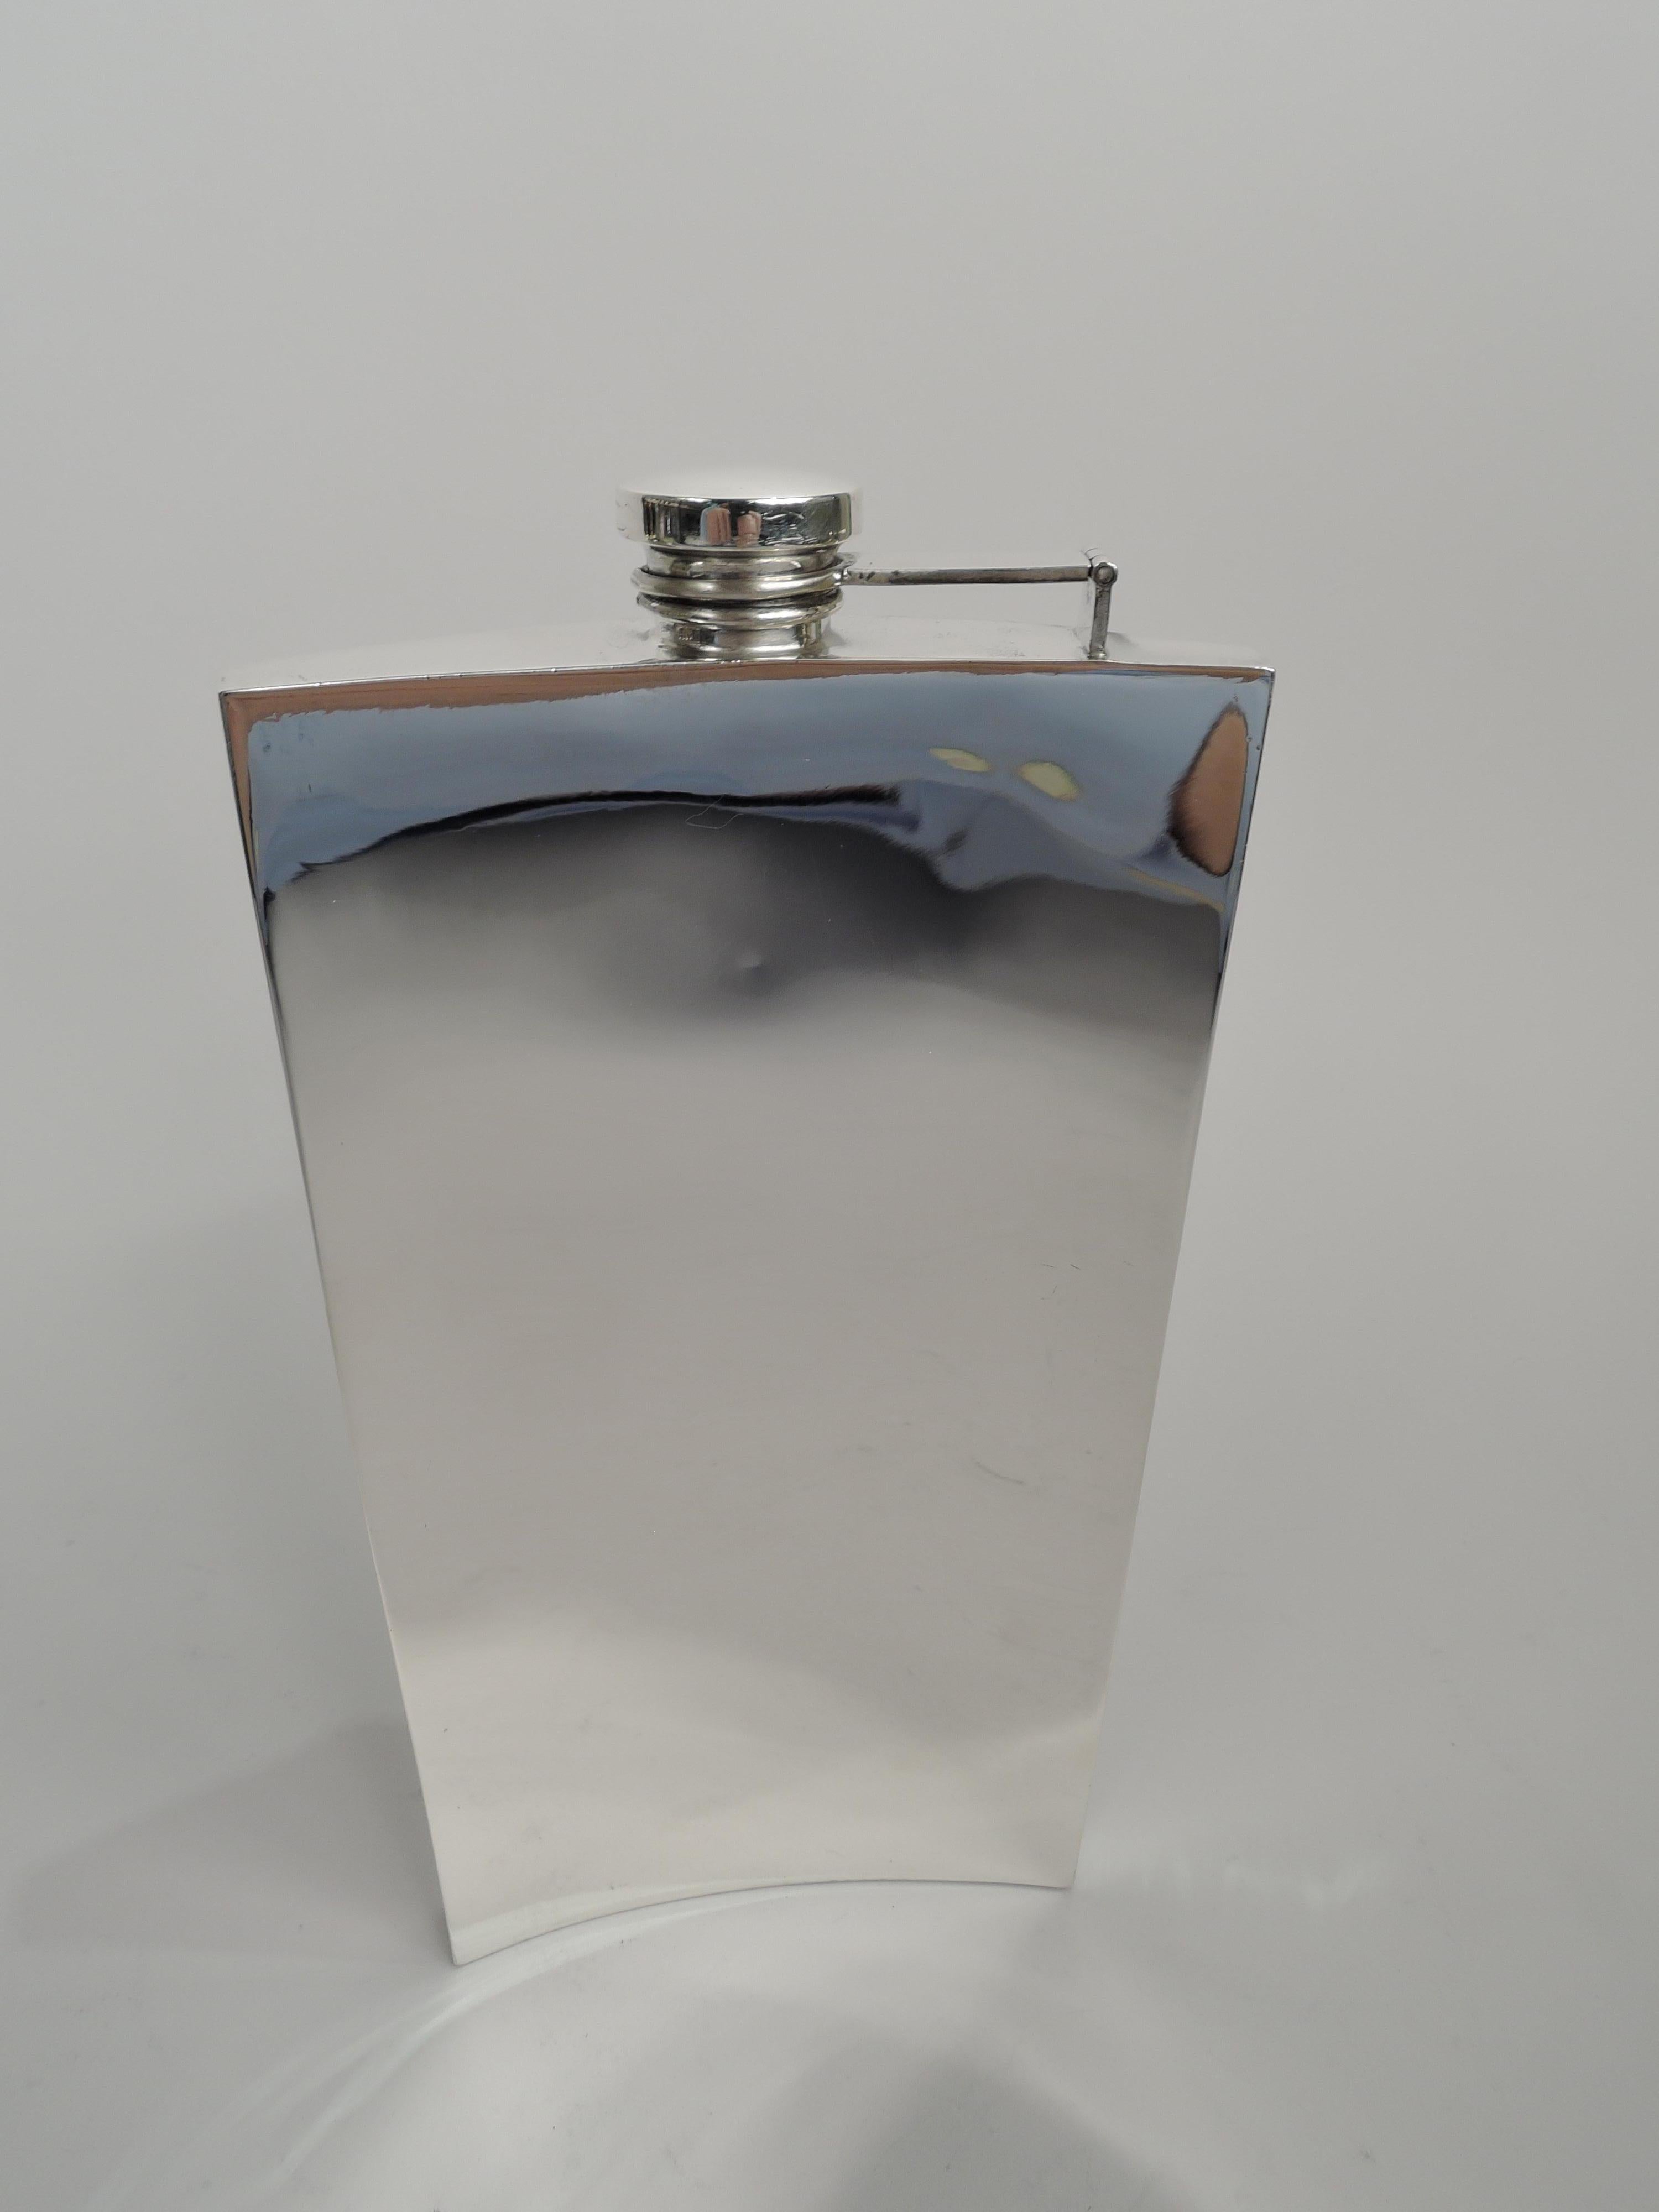 Art Deco sterling silver flask. Made by Watrous (part of International) in Wallingford, Conn., ca 1920. Curved and rectilinear with flat sides. Cover hinged, threaded, and cork-lined. On front are vertical engine-turned stripes with rectangular mono